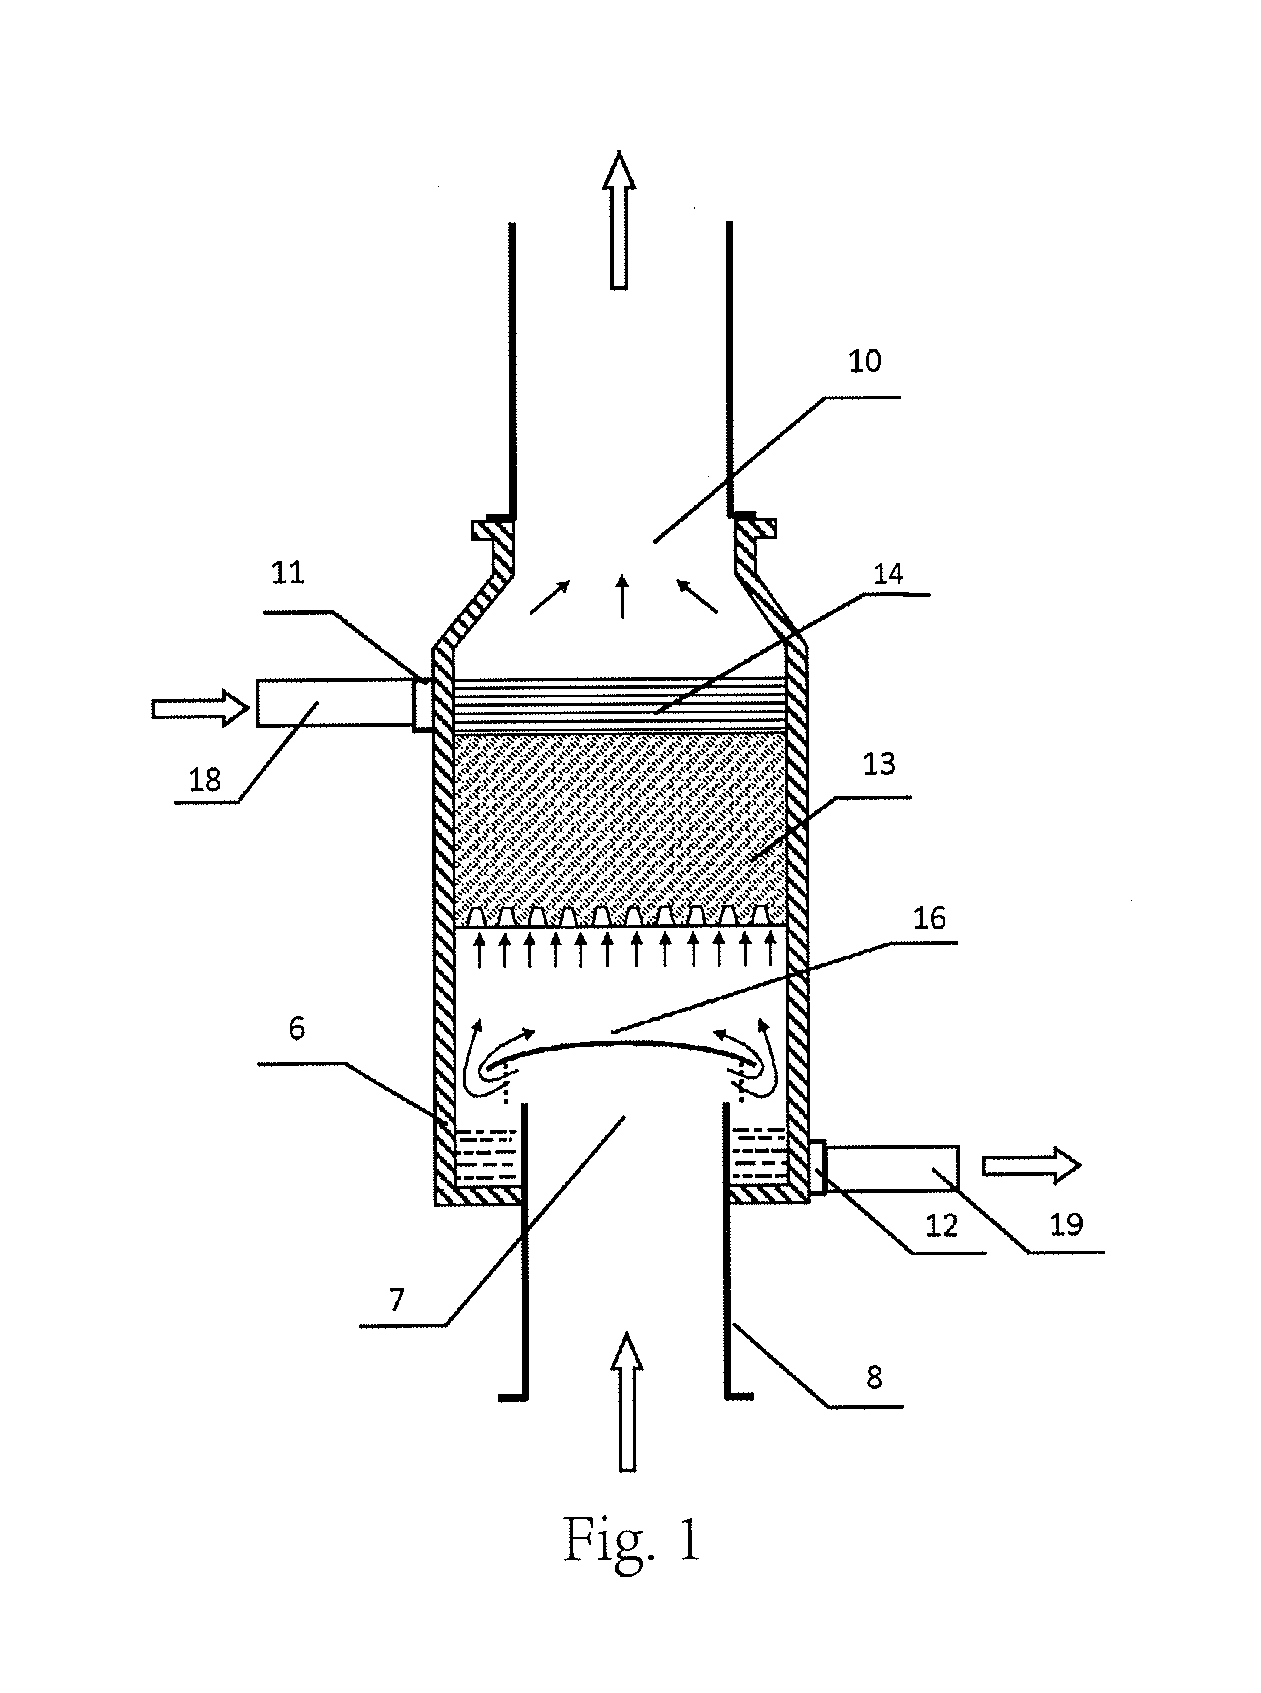 Method, apparatus, and system used for purifying and silencing exhaust of internal combustion engine